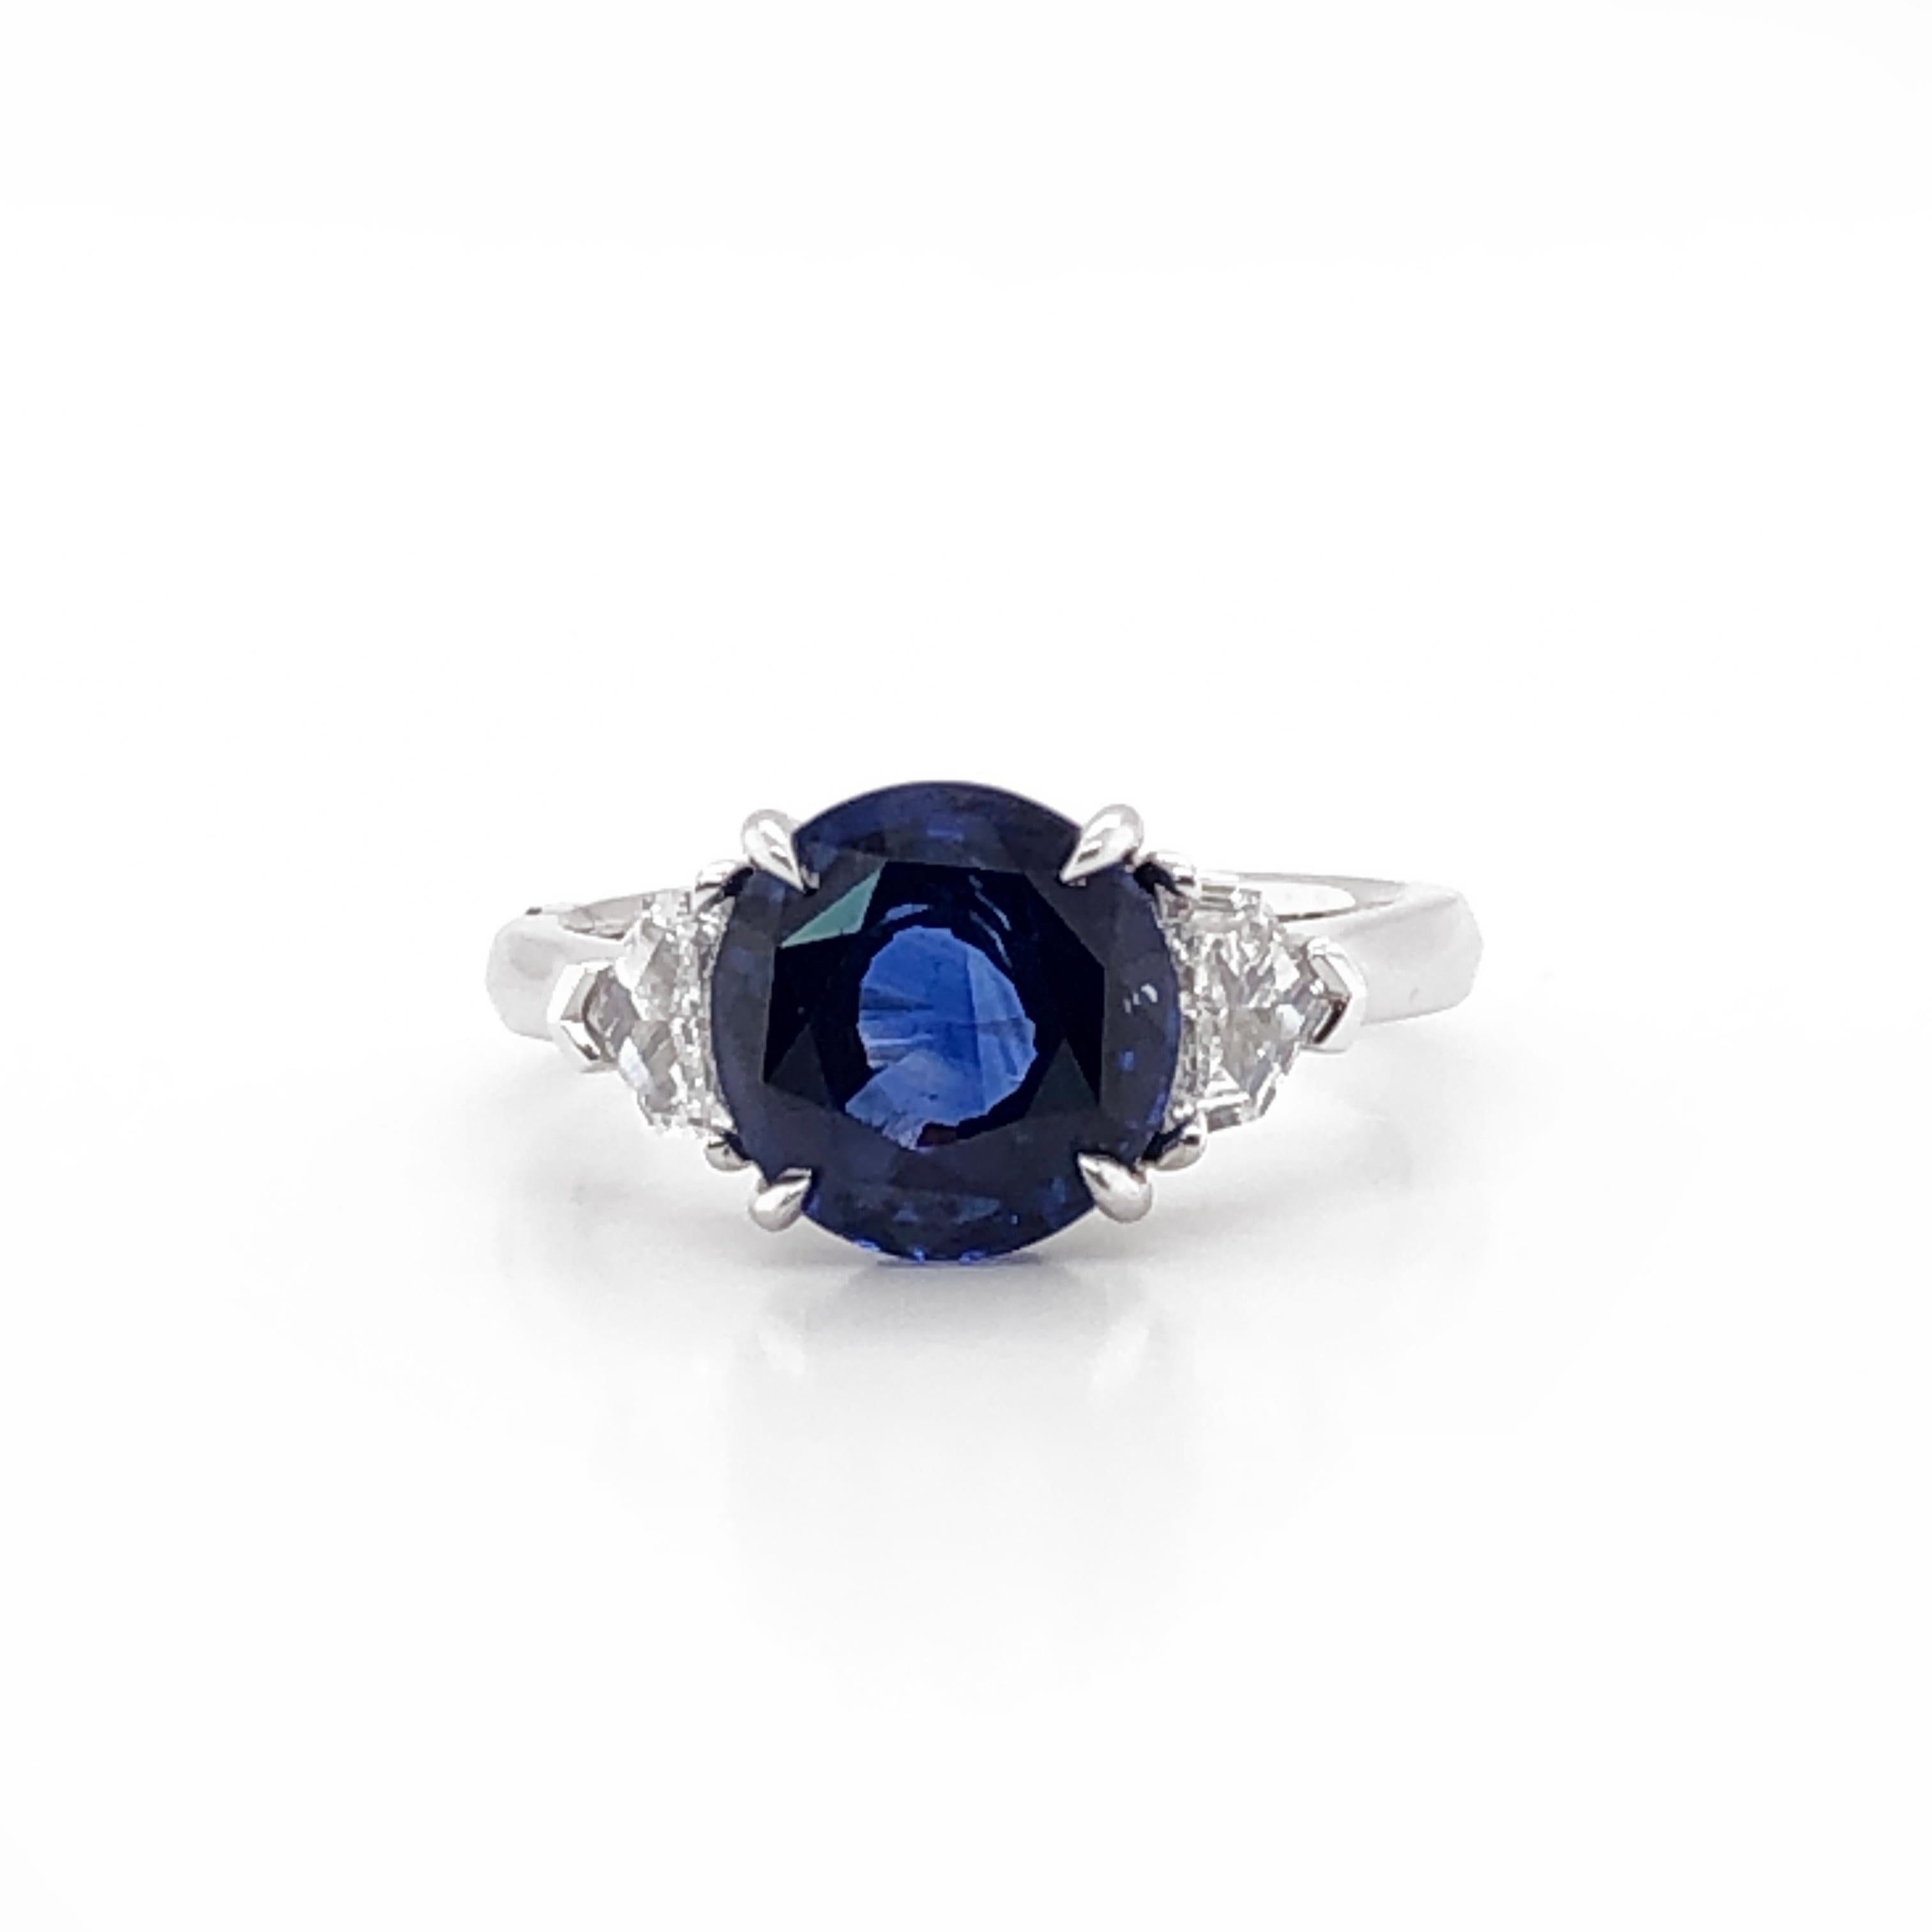 This elegant gemstone ring is crowned with a rich deep blue oval Ceylon sapphire 3.60 ct, accented at the sides with shield cut white diamonds 0.36 ct total. The white diamonds are natural in G-H Color Clarity VS.  Ring is platinum 950 metal. 